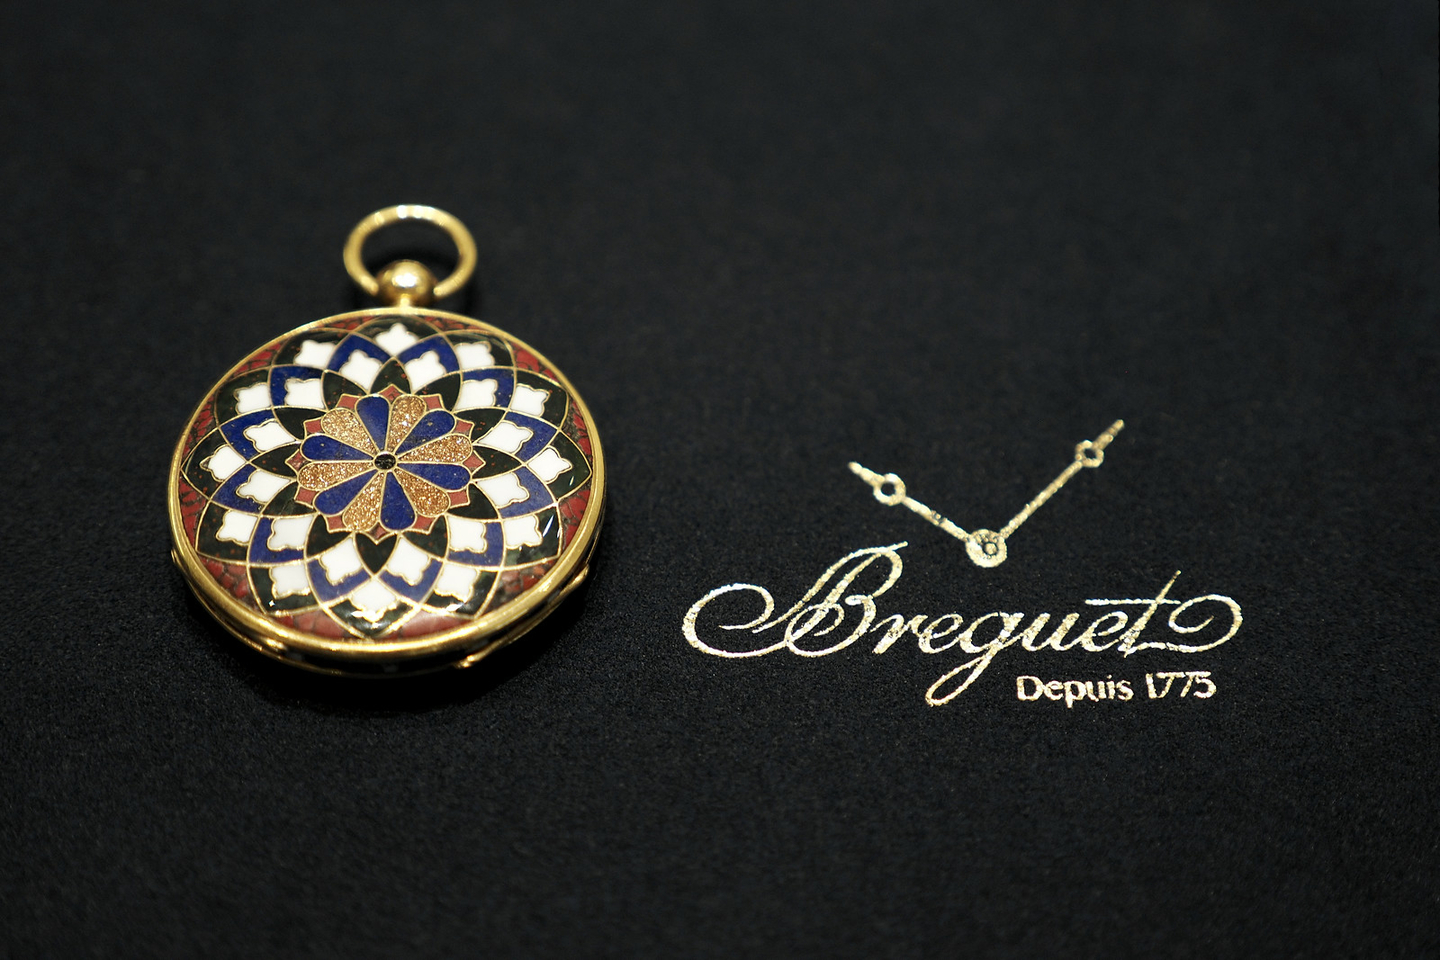 Historic Breguet Timepieces Owned by Russian Nobility in the 1800s